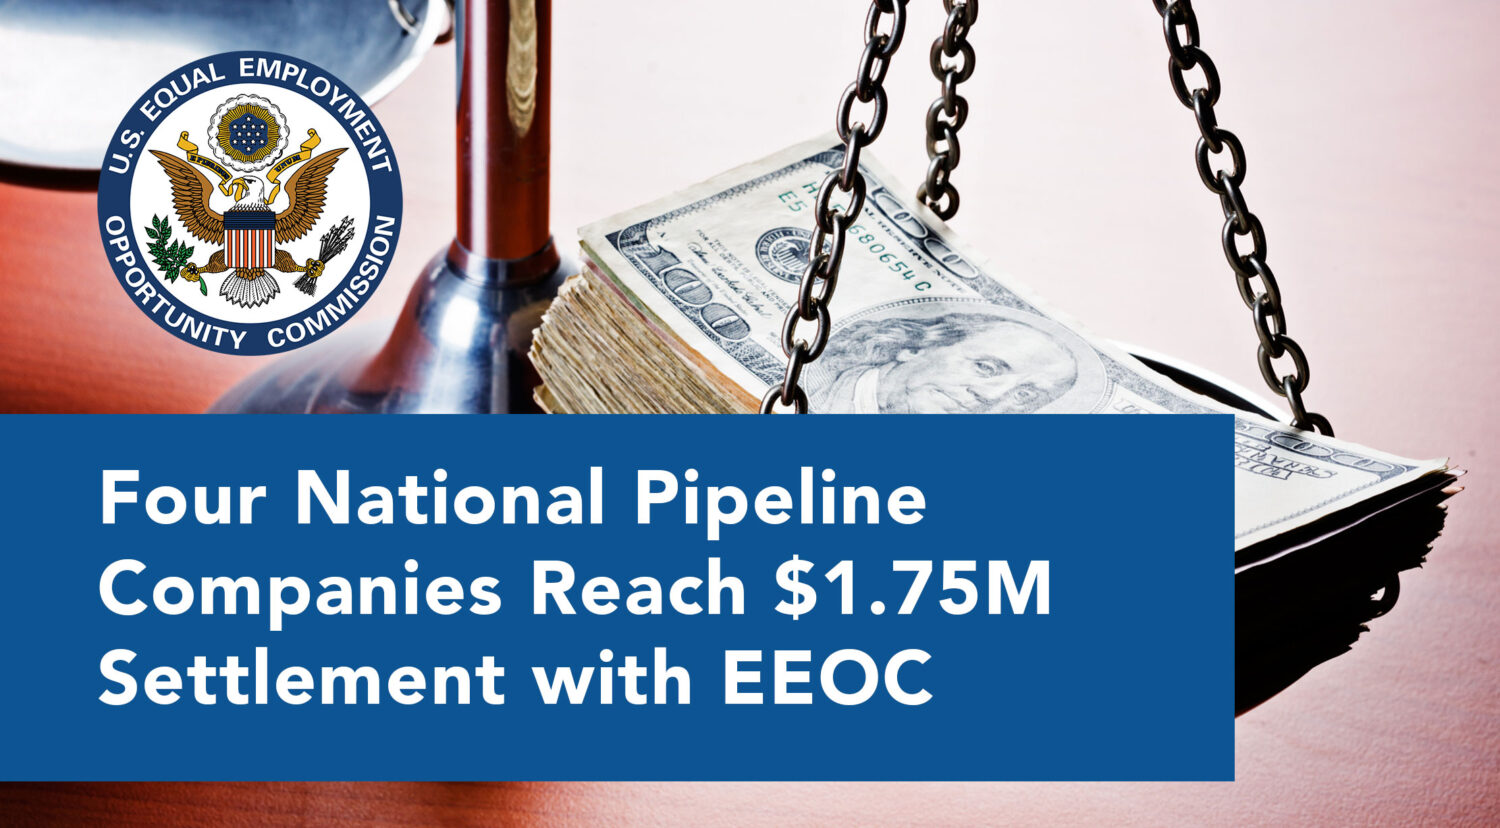 Four national pipeline companies will pay $1.75M for discrimination and harassment in the workplace